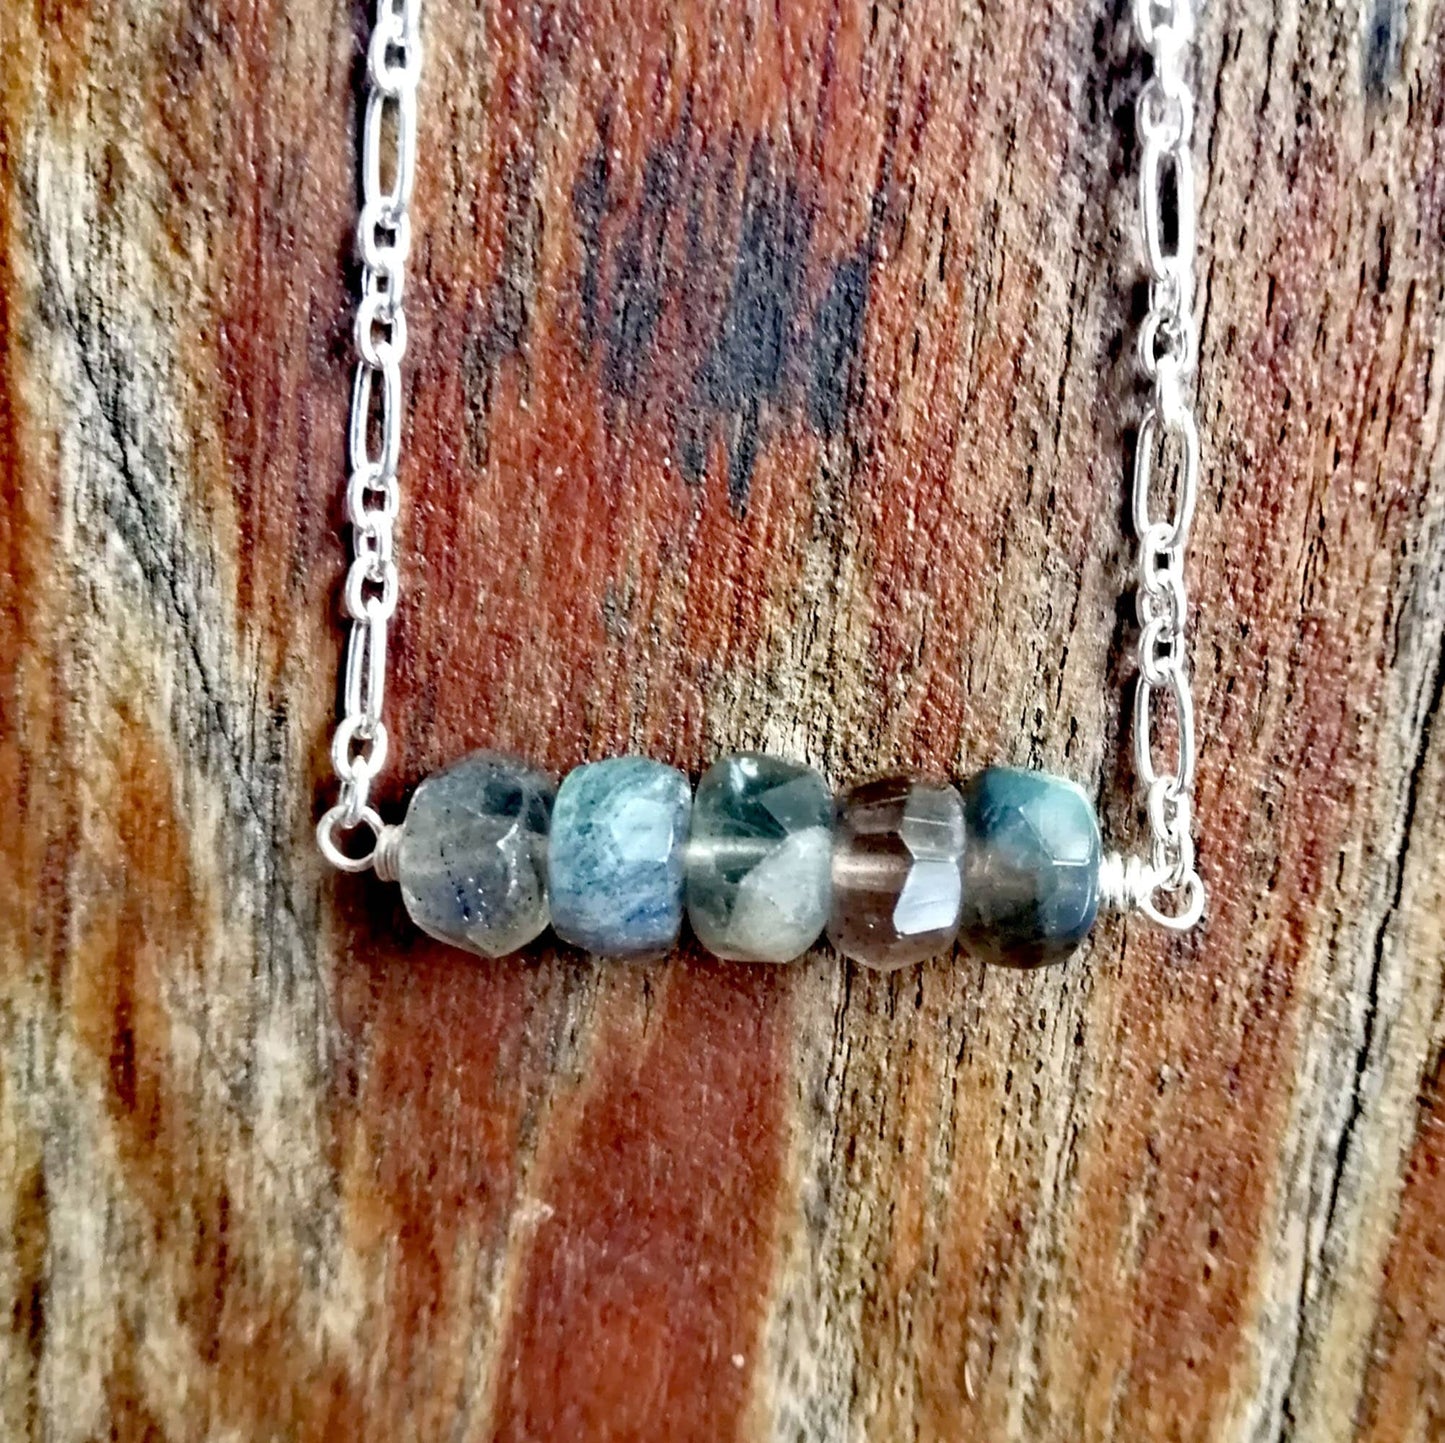 Faceted Labradorite on a Sterling Chain - Crown Chakra - Clear and Protect your Aura